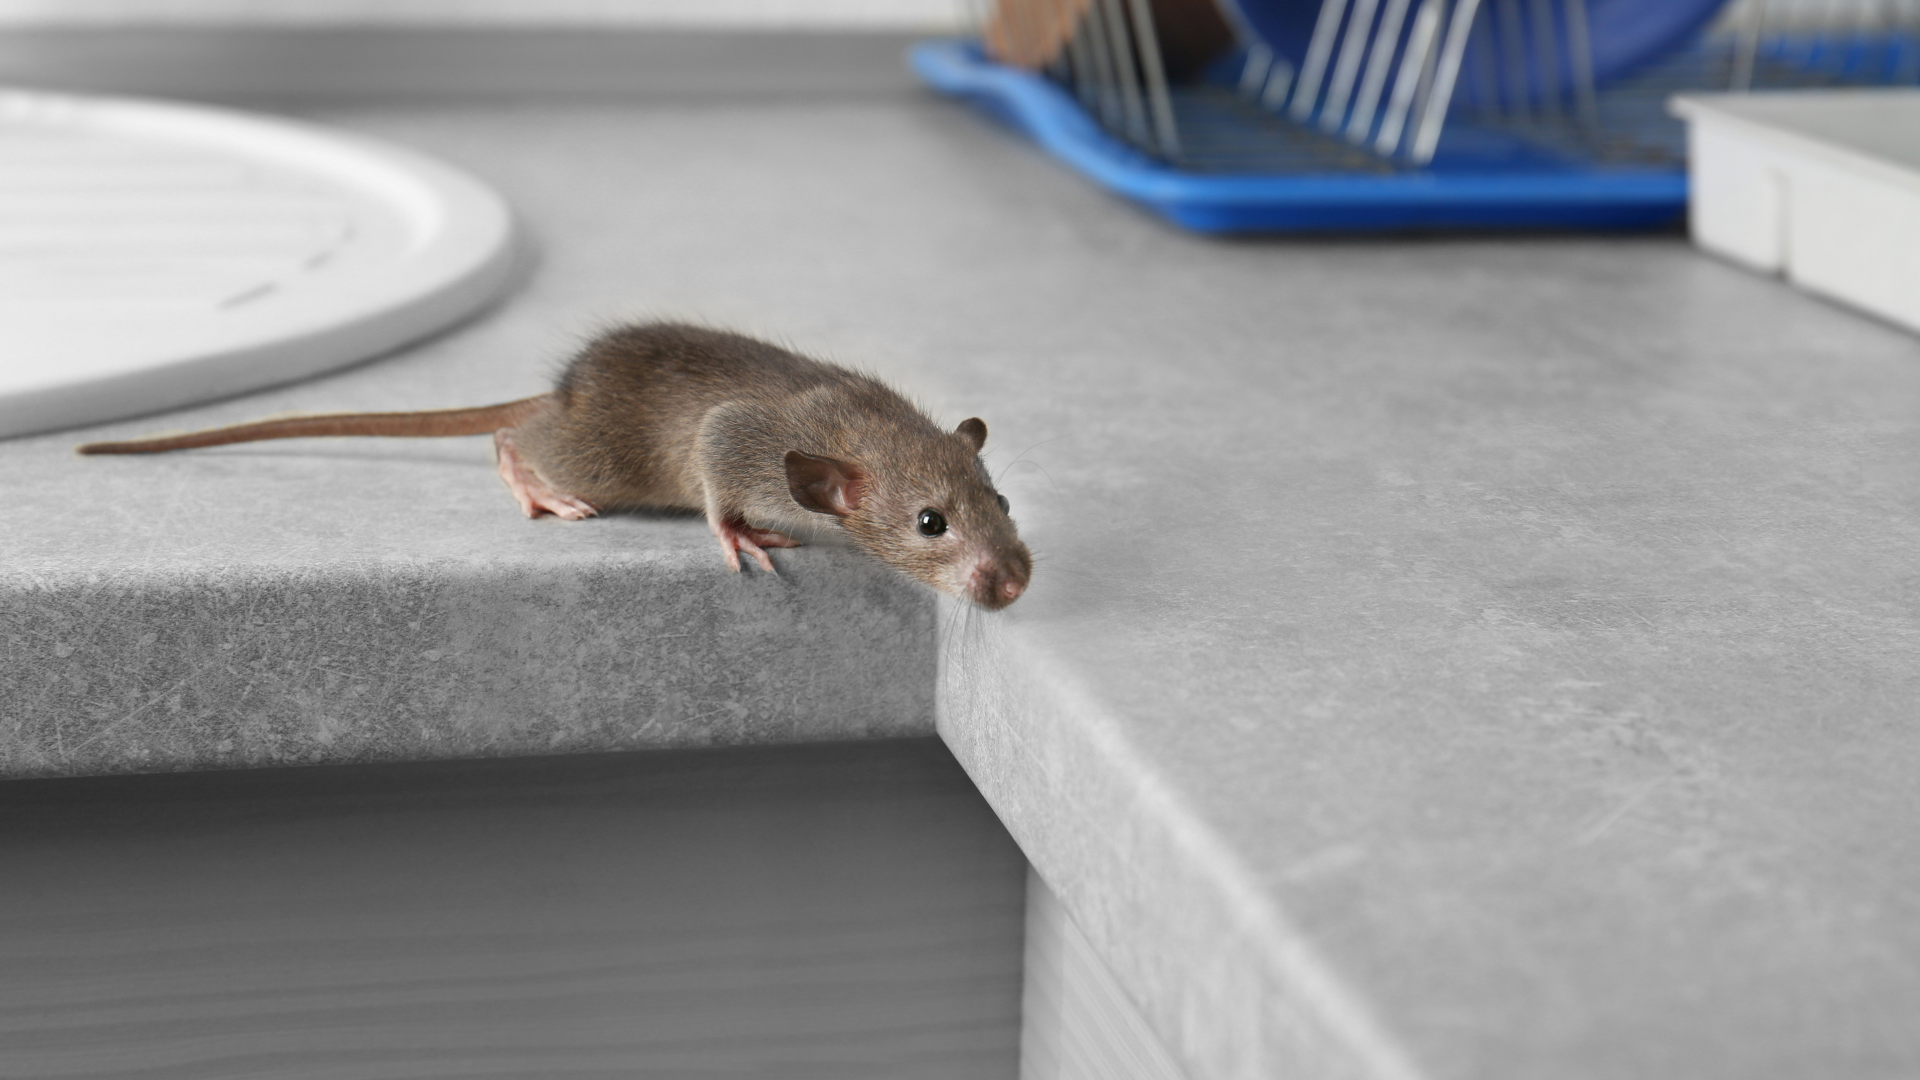 lure mice to traps is by using sweet or fatty foods